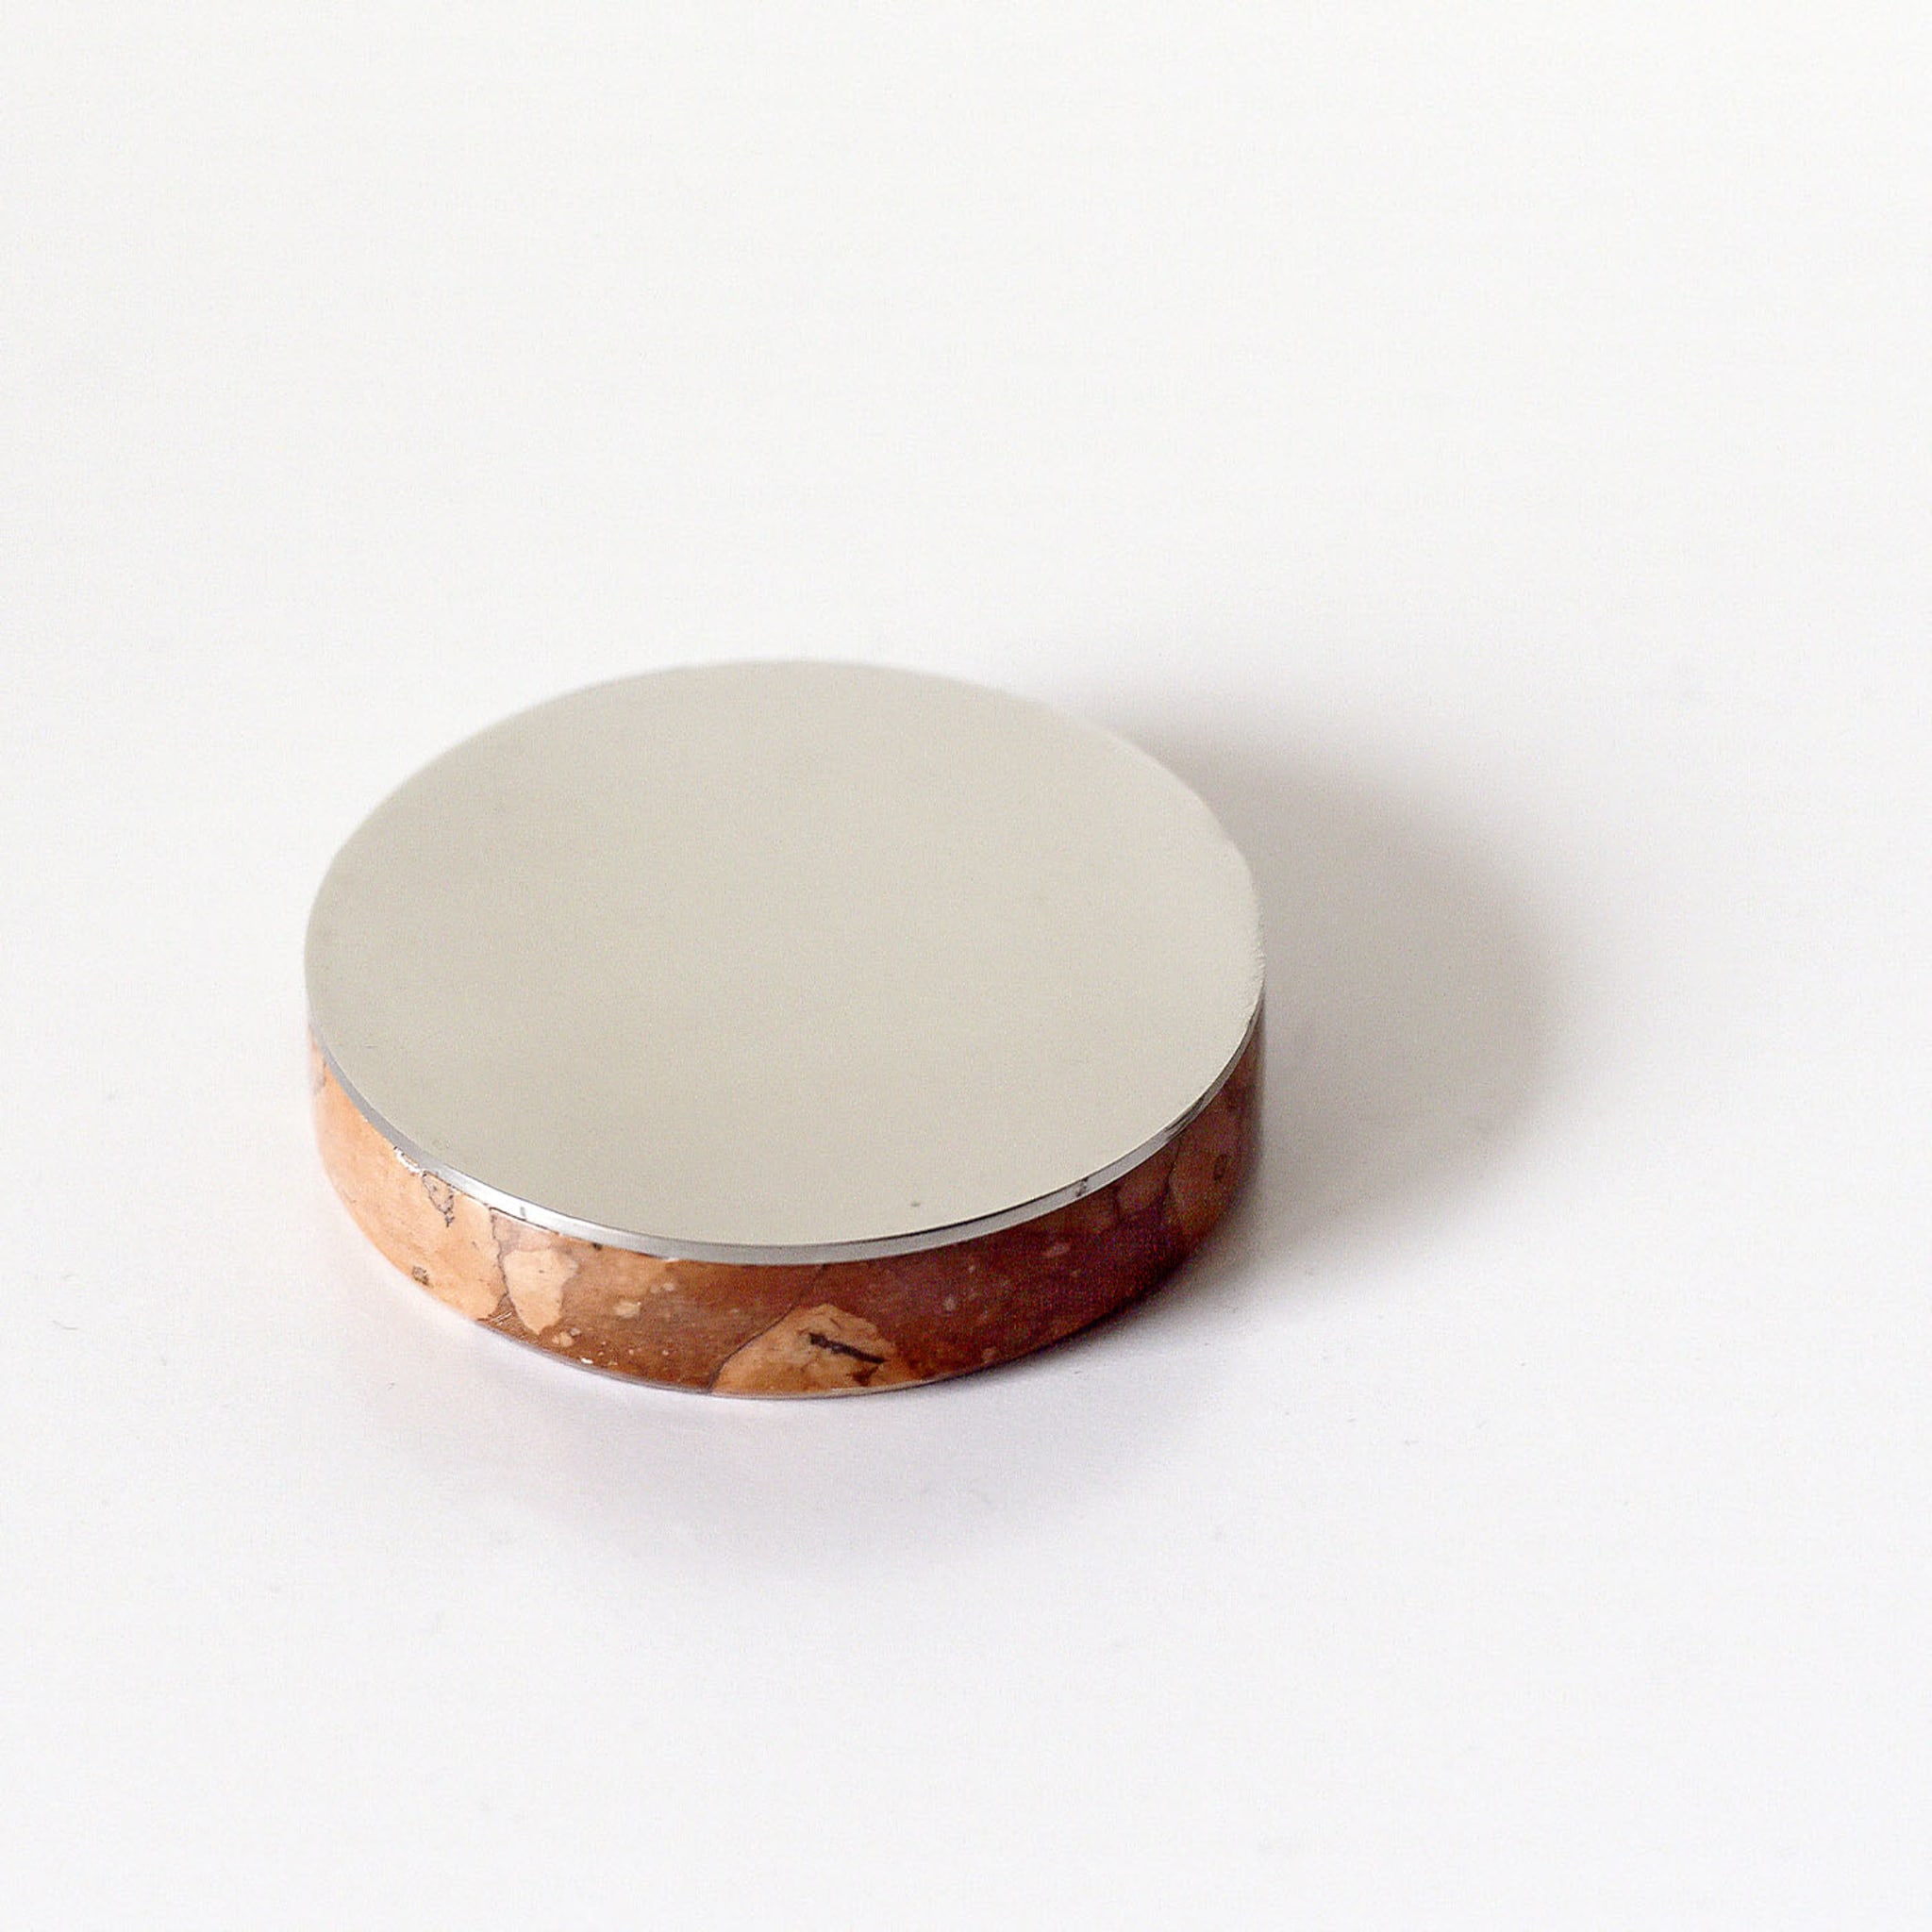 Saponetta Marble and Steel Bar of Soap - Alternative view 1